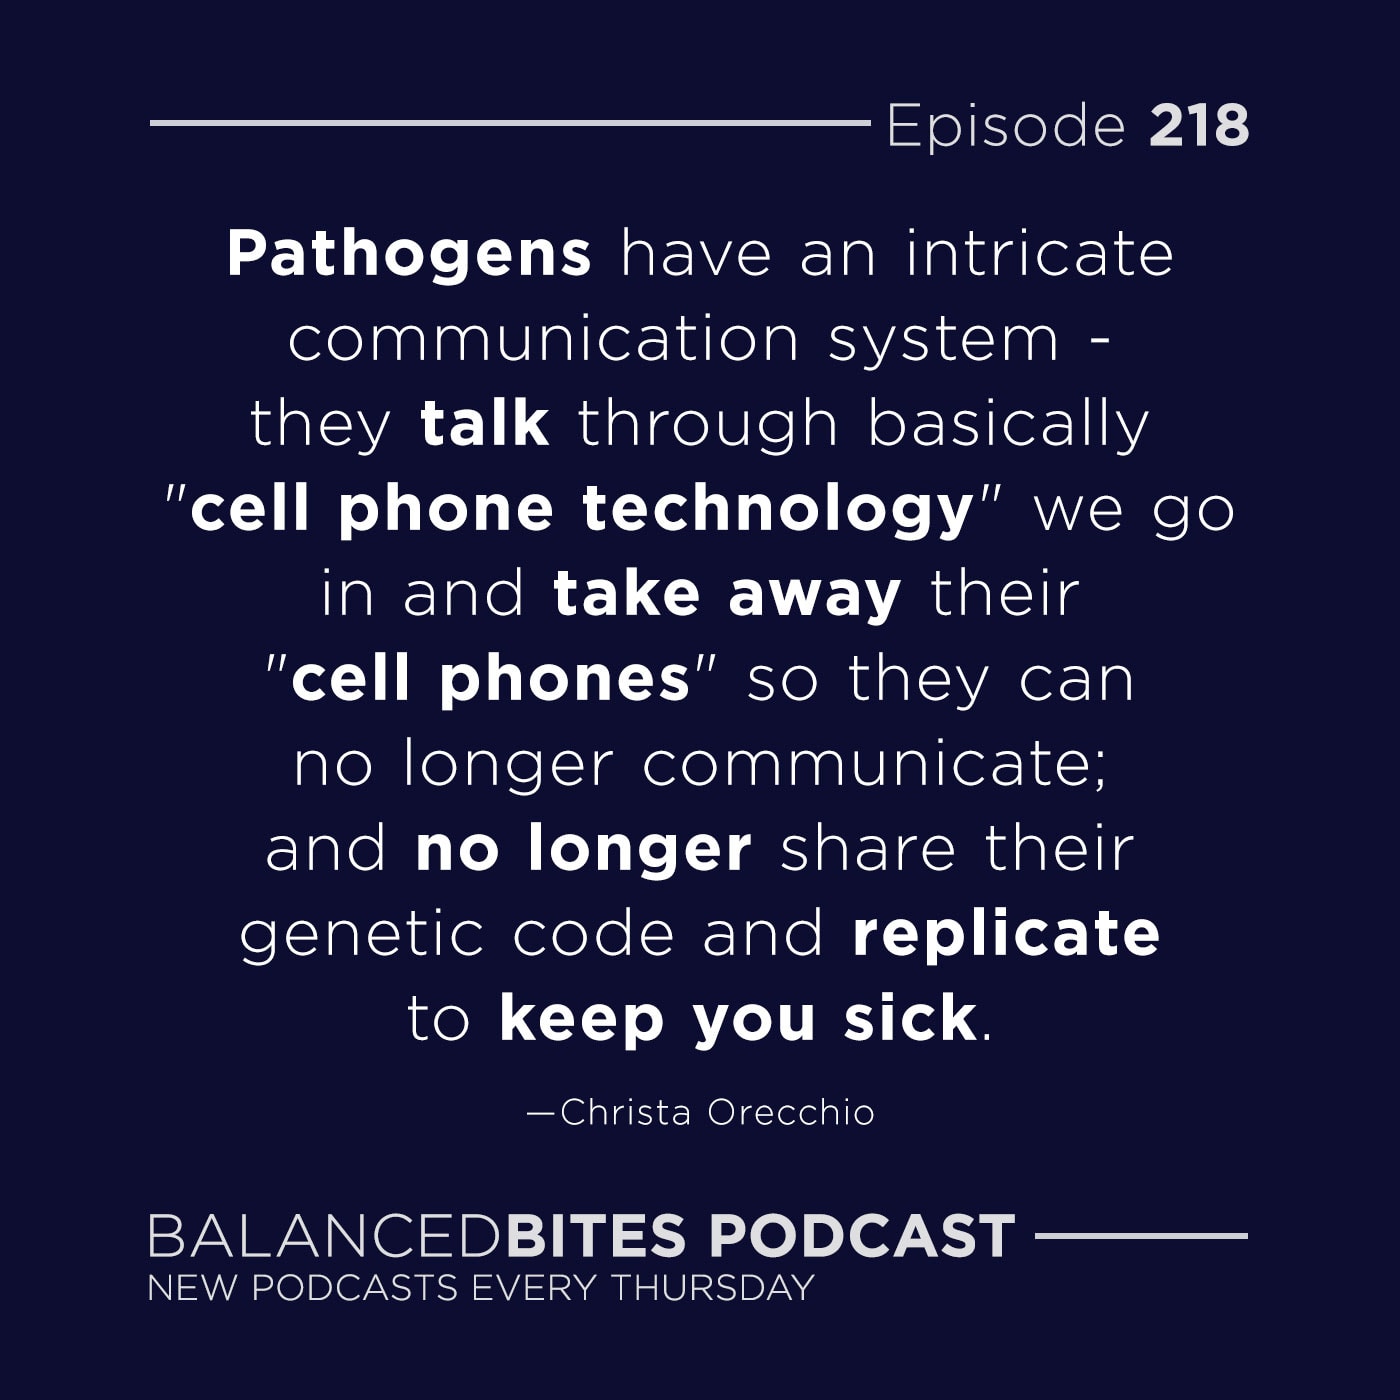 Quotes-shareables_episode-218-pathogens